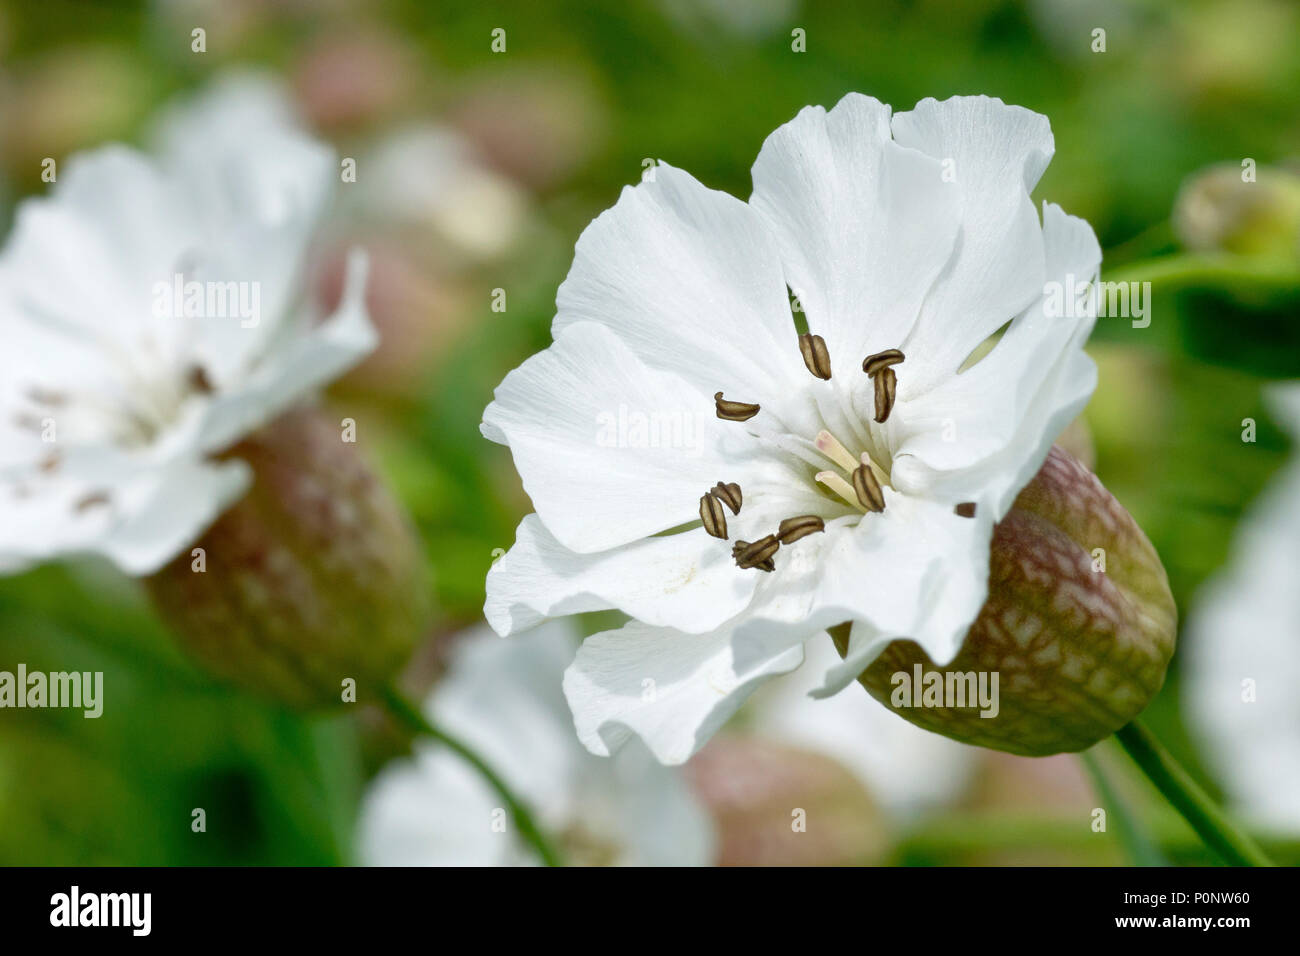 Sea Campion (silene vulgaris subsp. maritima), close up on a single flower with others in the background. Stock Photo